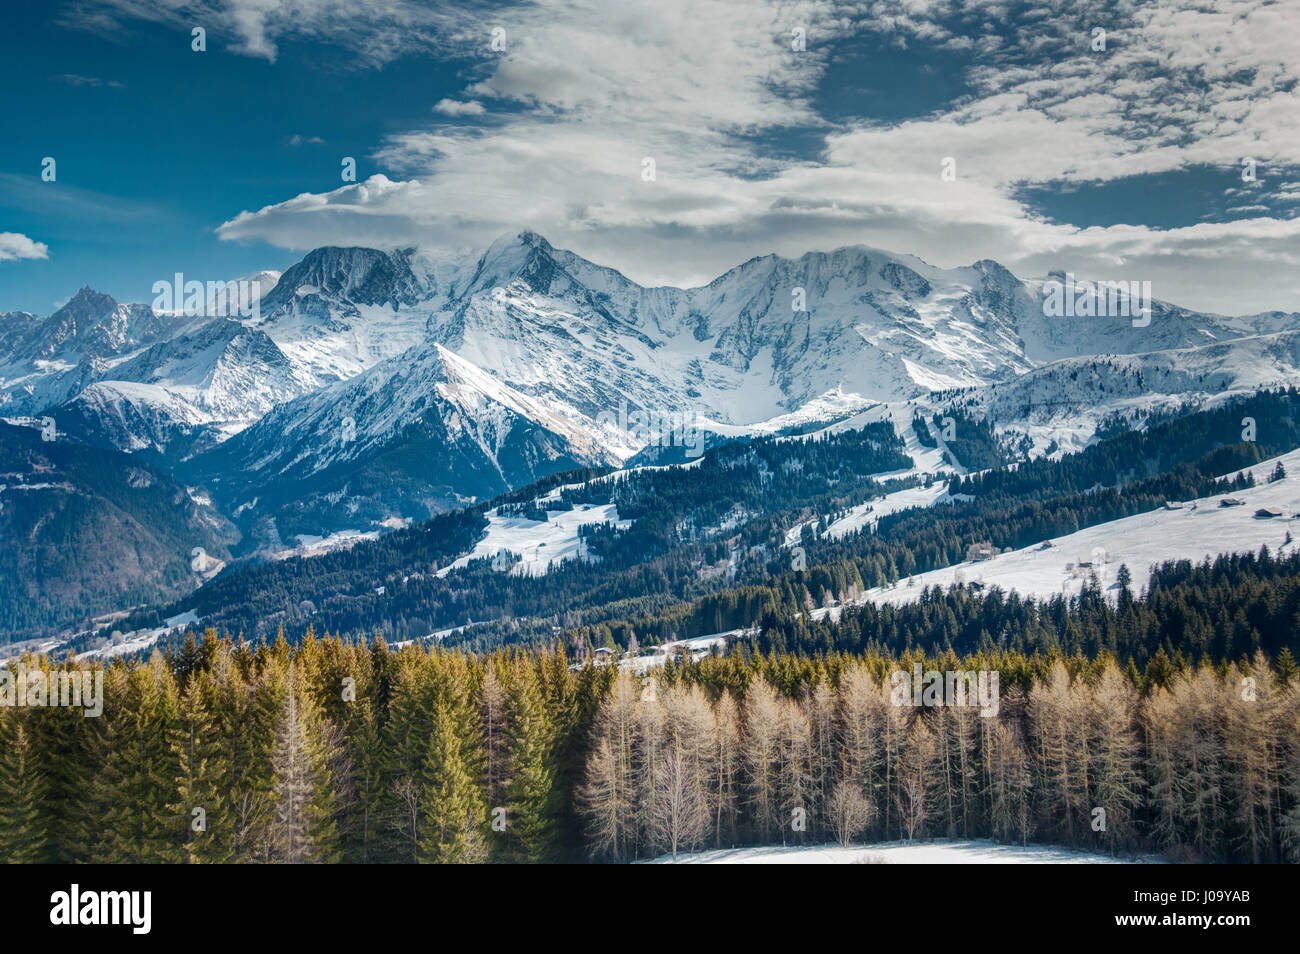 High snowy mountains and low clouds in the distance with foreground trees in French Alps, Mont Blanc area, Chamonix. Stock Photo